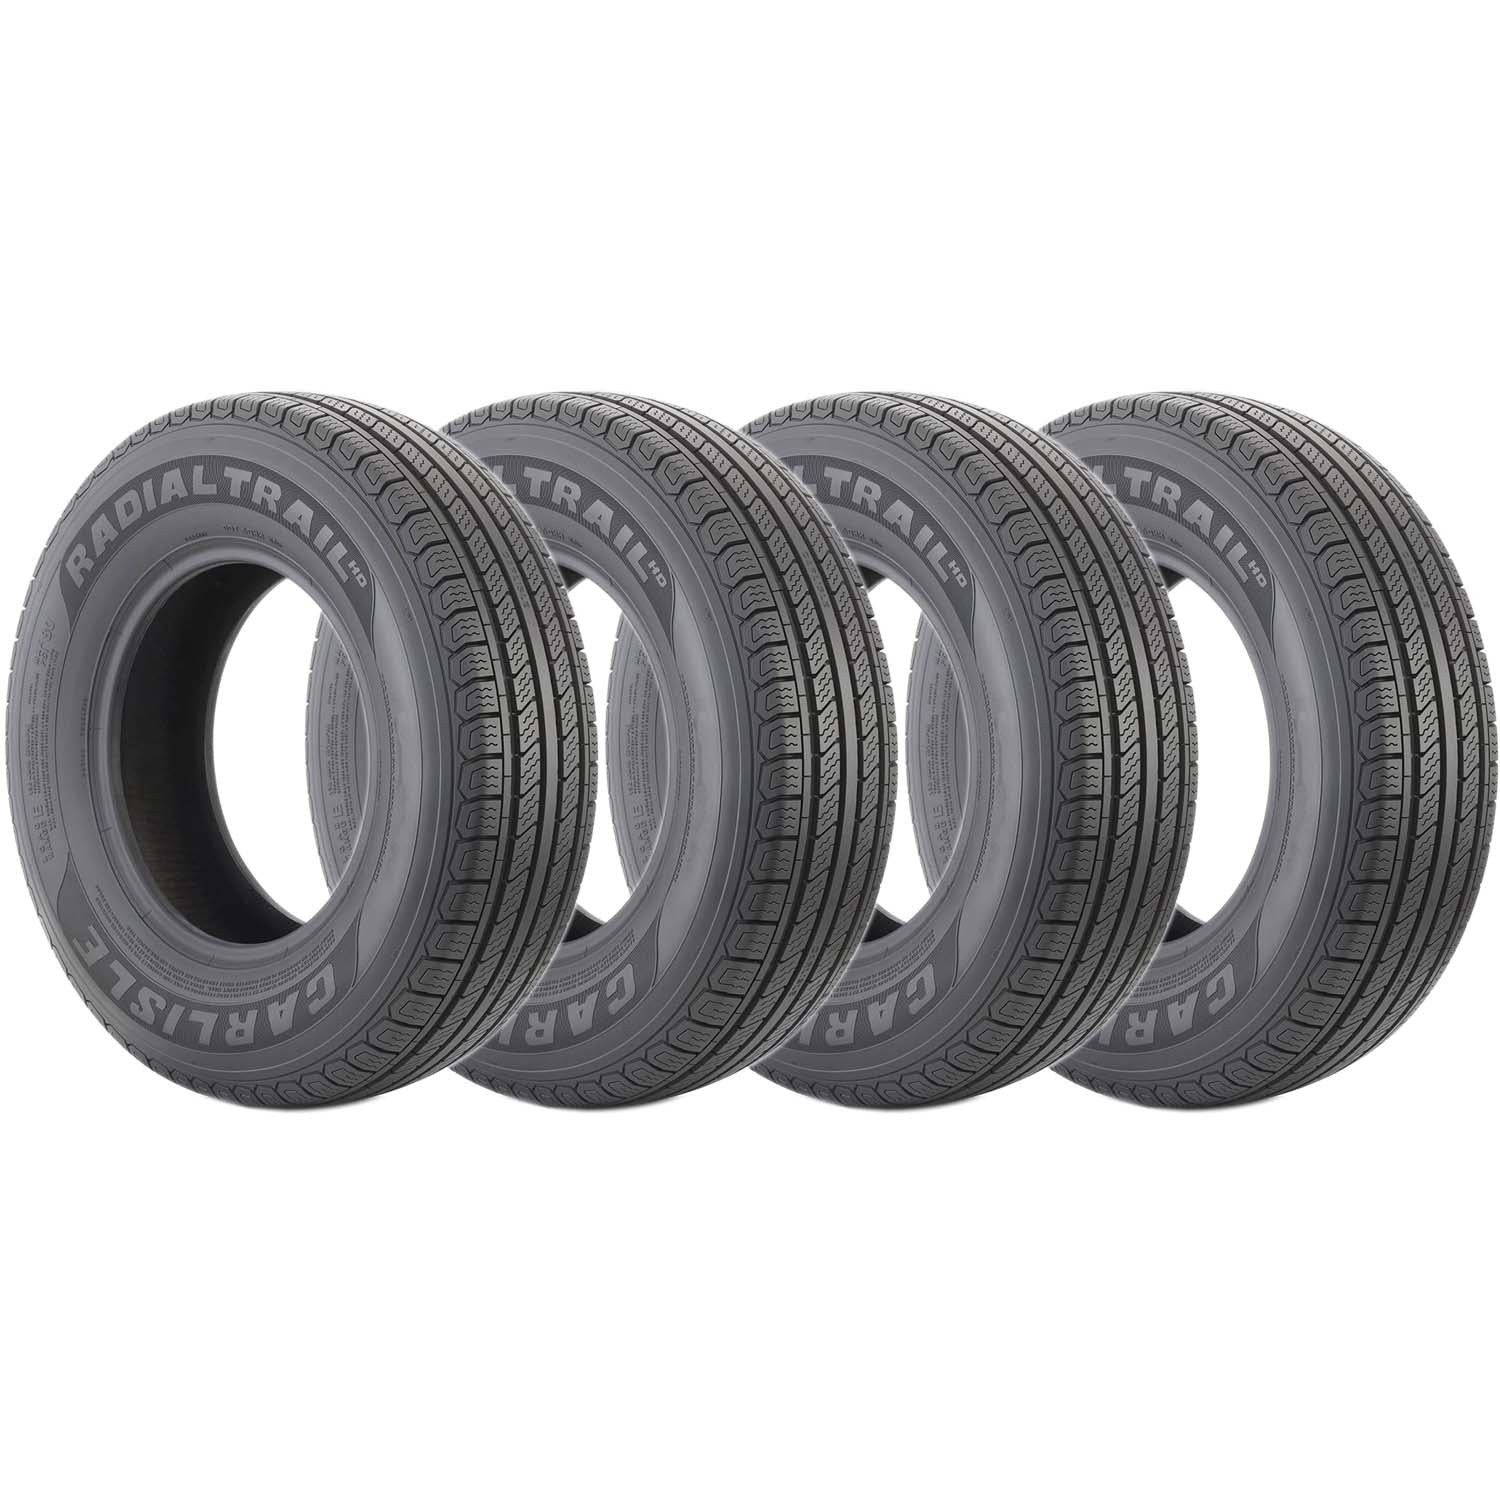 Carlisle Radial Trail HD Trailer Tire LRF 12ply ST235/85R16 Pack of 4